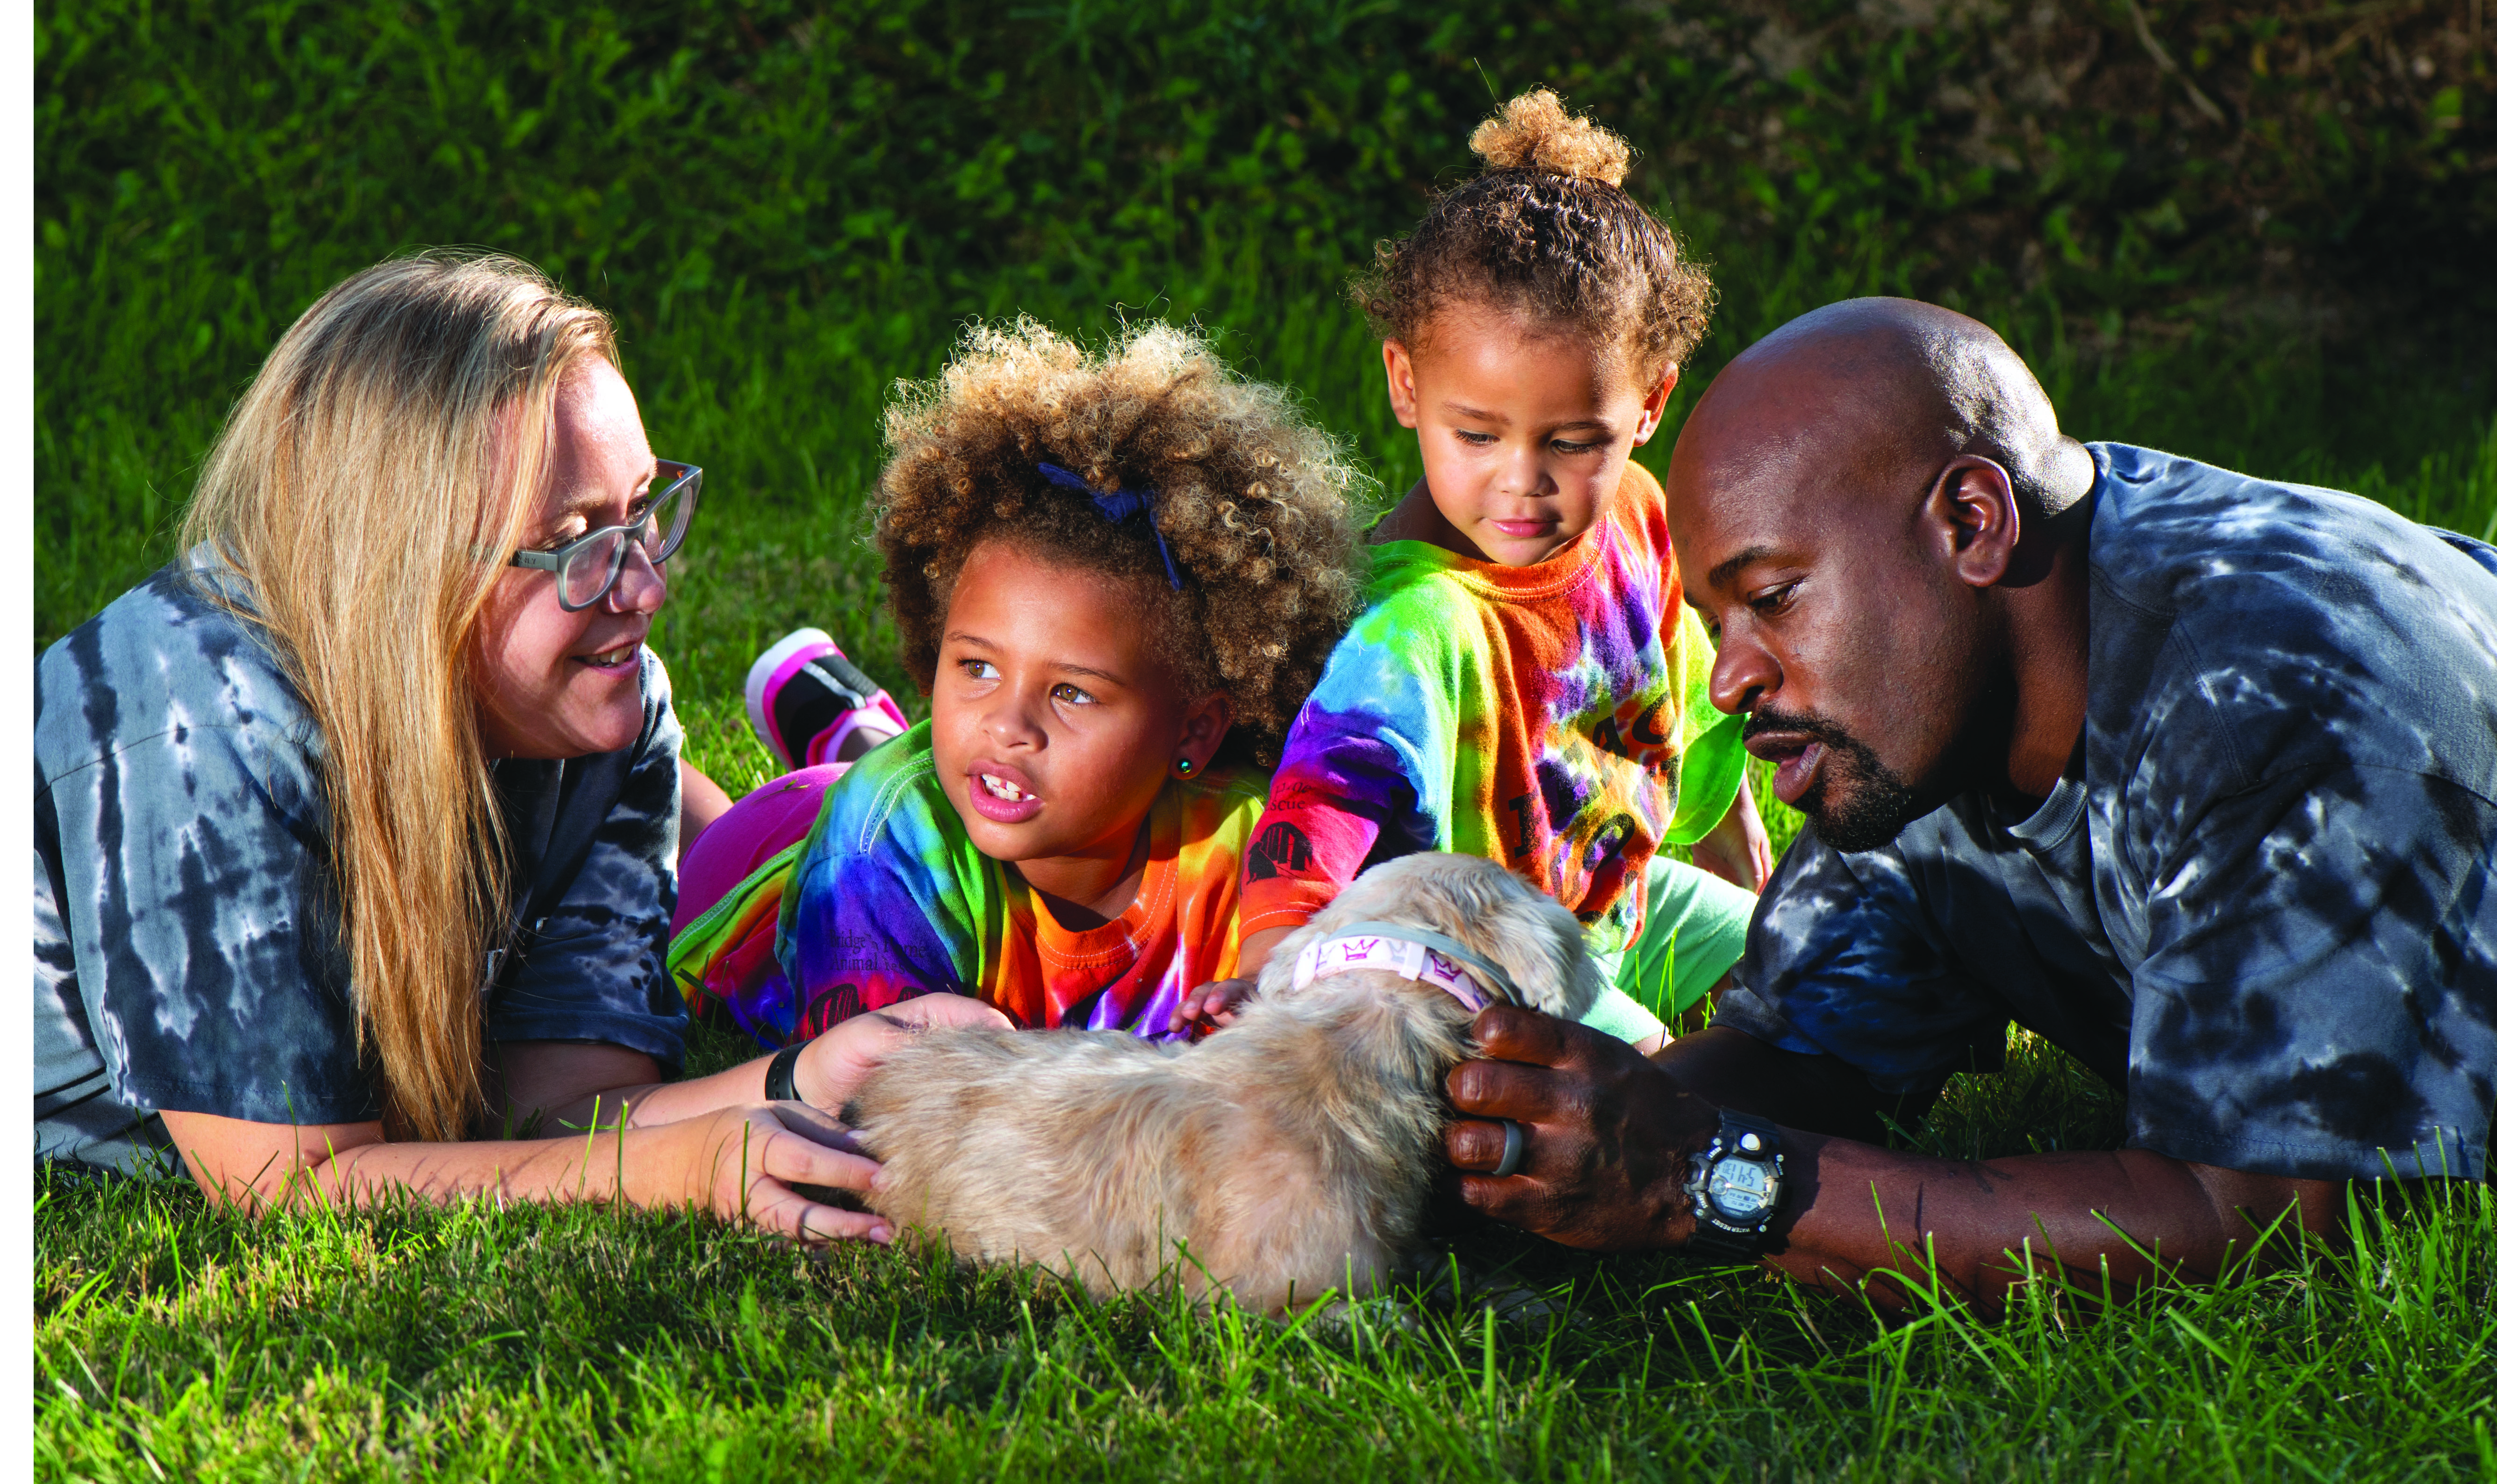 Omar Brooks, his family and their foster dog